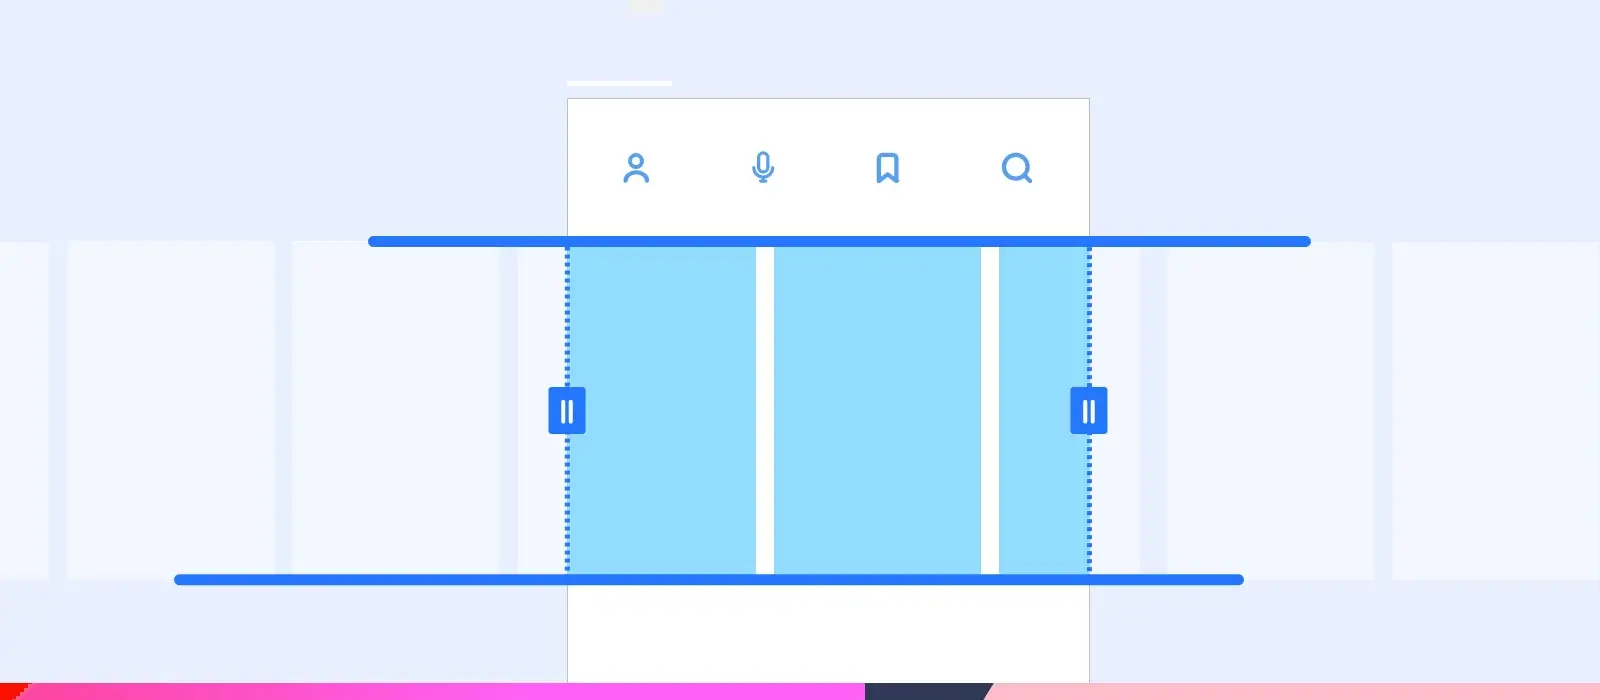 Wireframe demo of the new Stacks feature in the June 2020 release of Adobe XD.